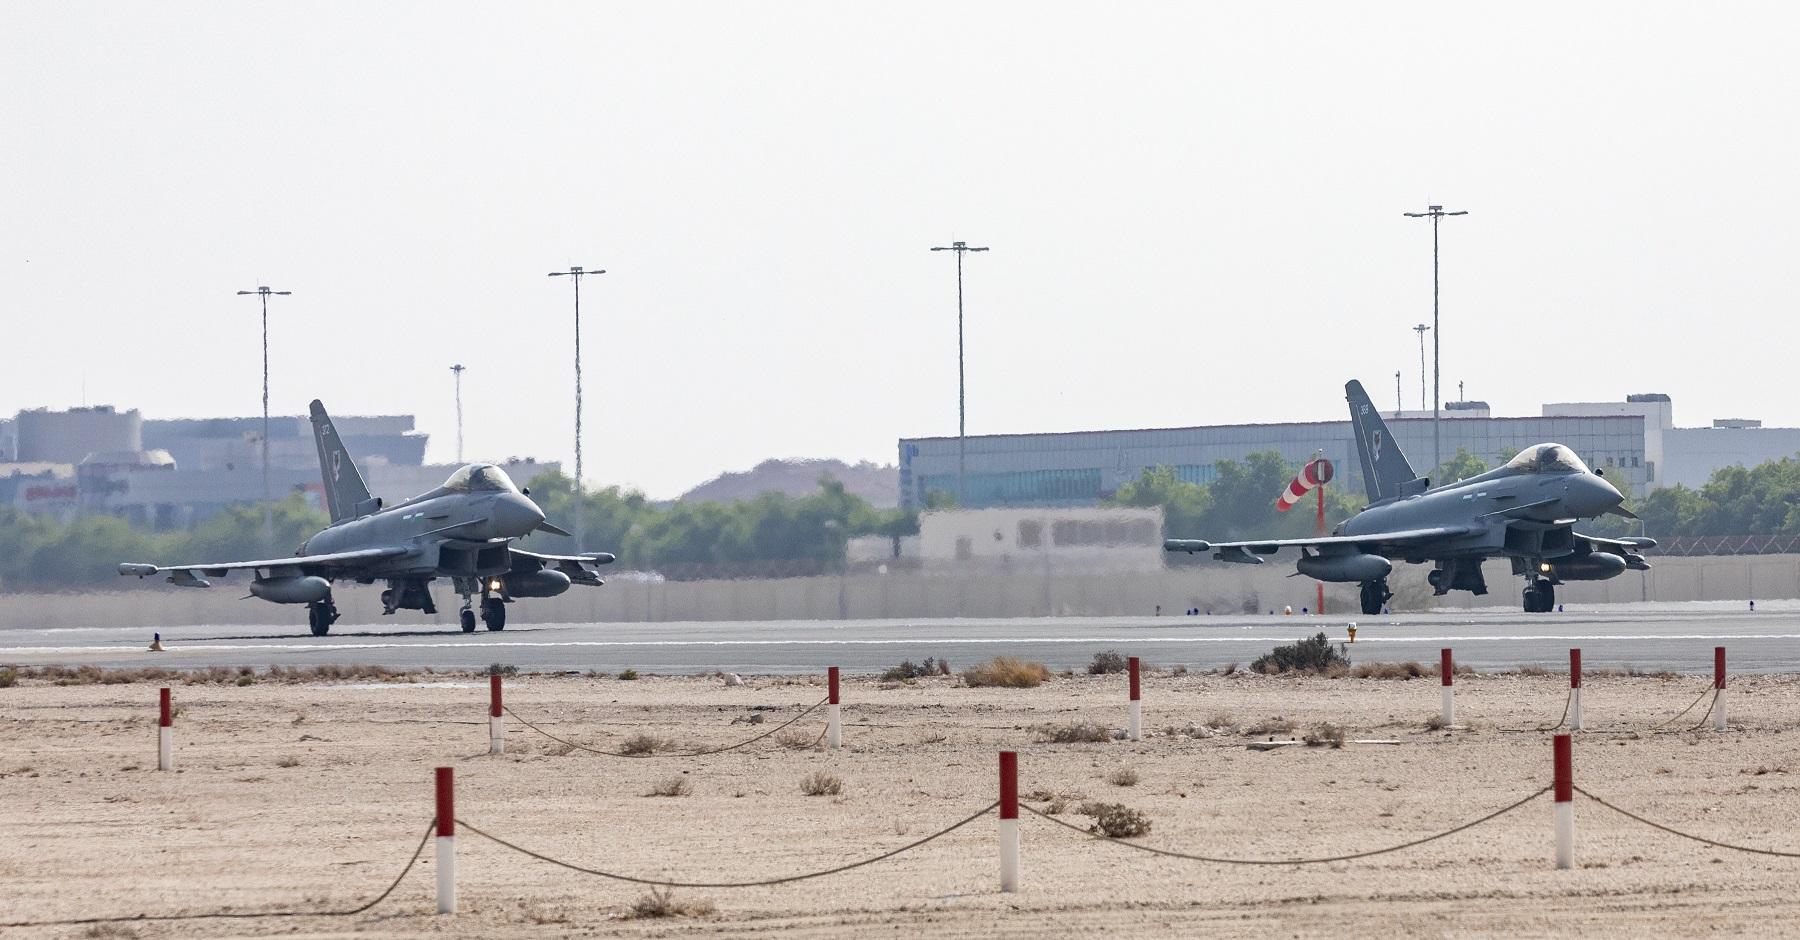 Royal Air Force Eurofighter Typhoons Conduct Joint Exercise with Qatar Emiri Air Force